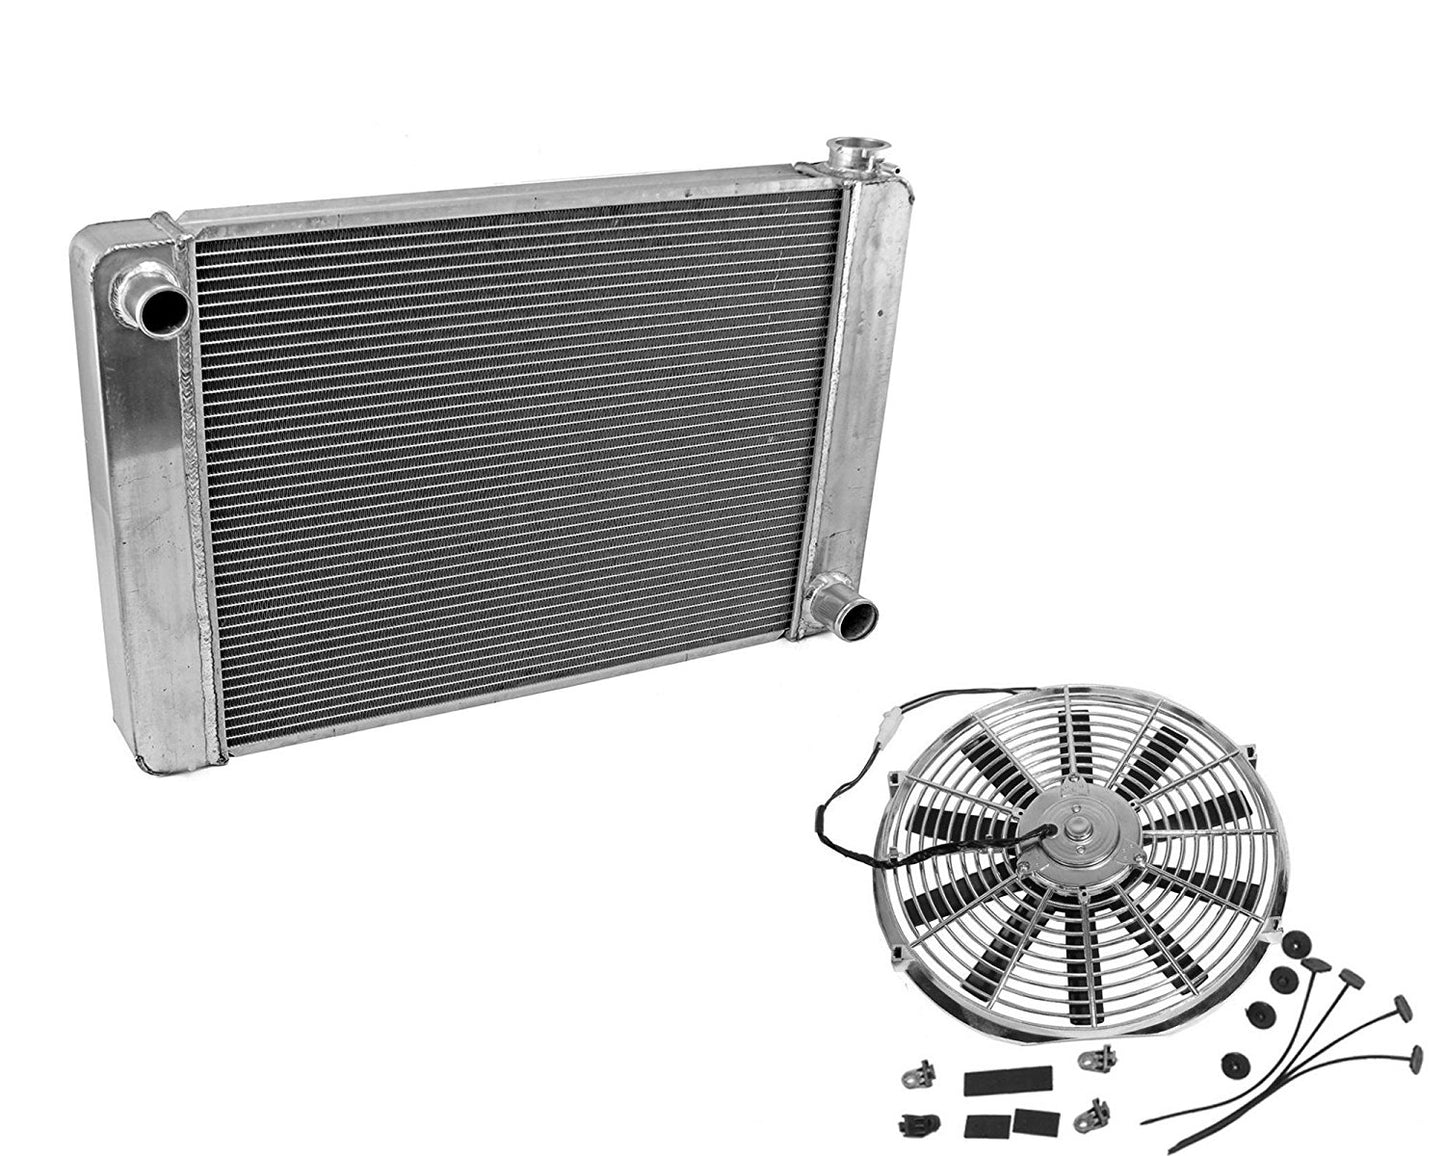 For SBC BBC Chevy GM Fabricated Aluminum Radiator 21" x 19" x3" & 14" Chrome Straight Blade Cooling Fan